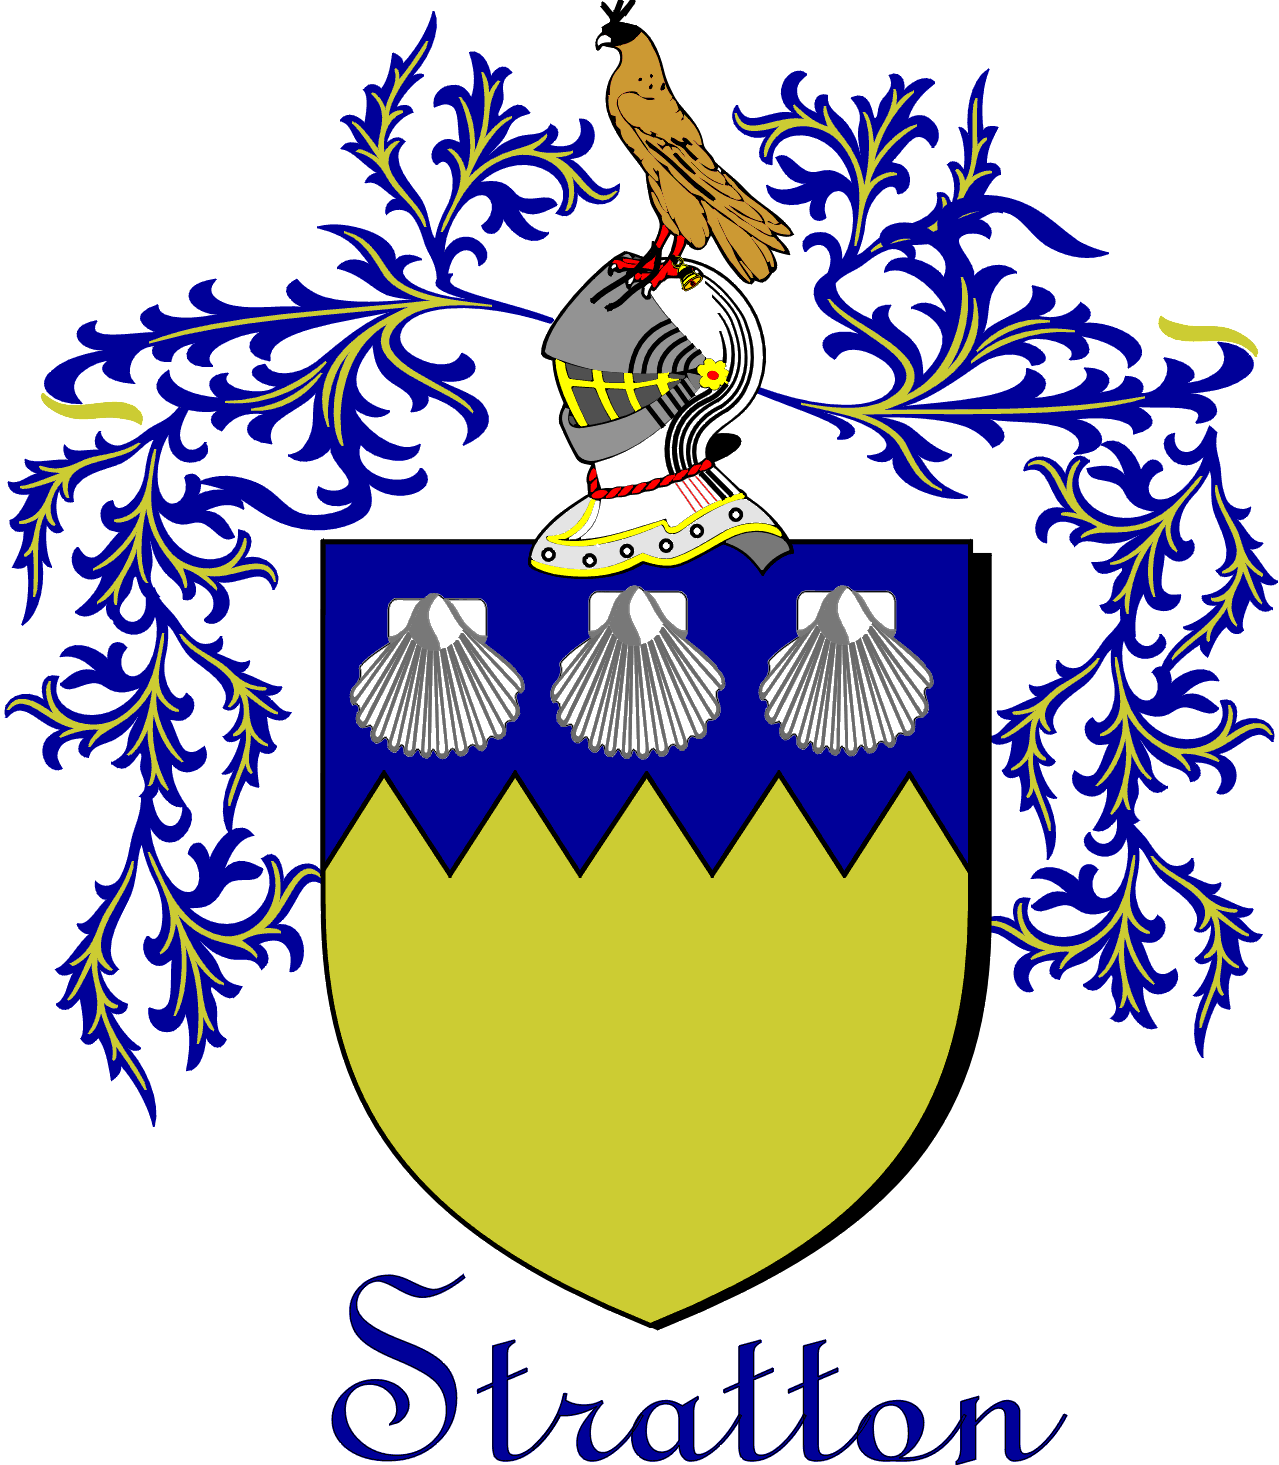 Stratton family coat of arms